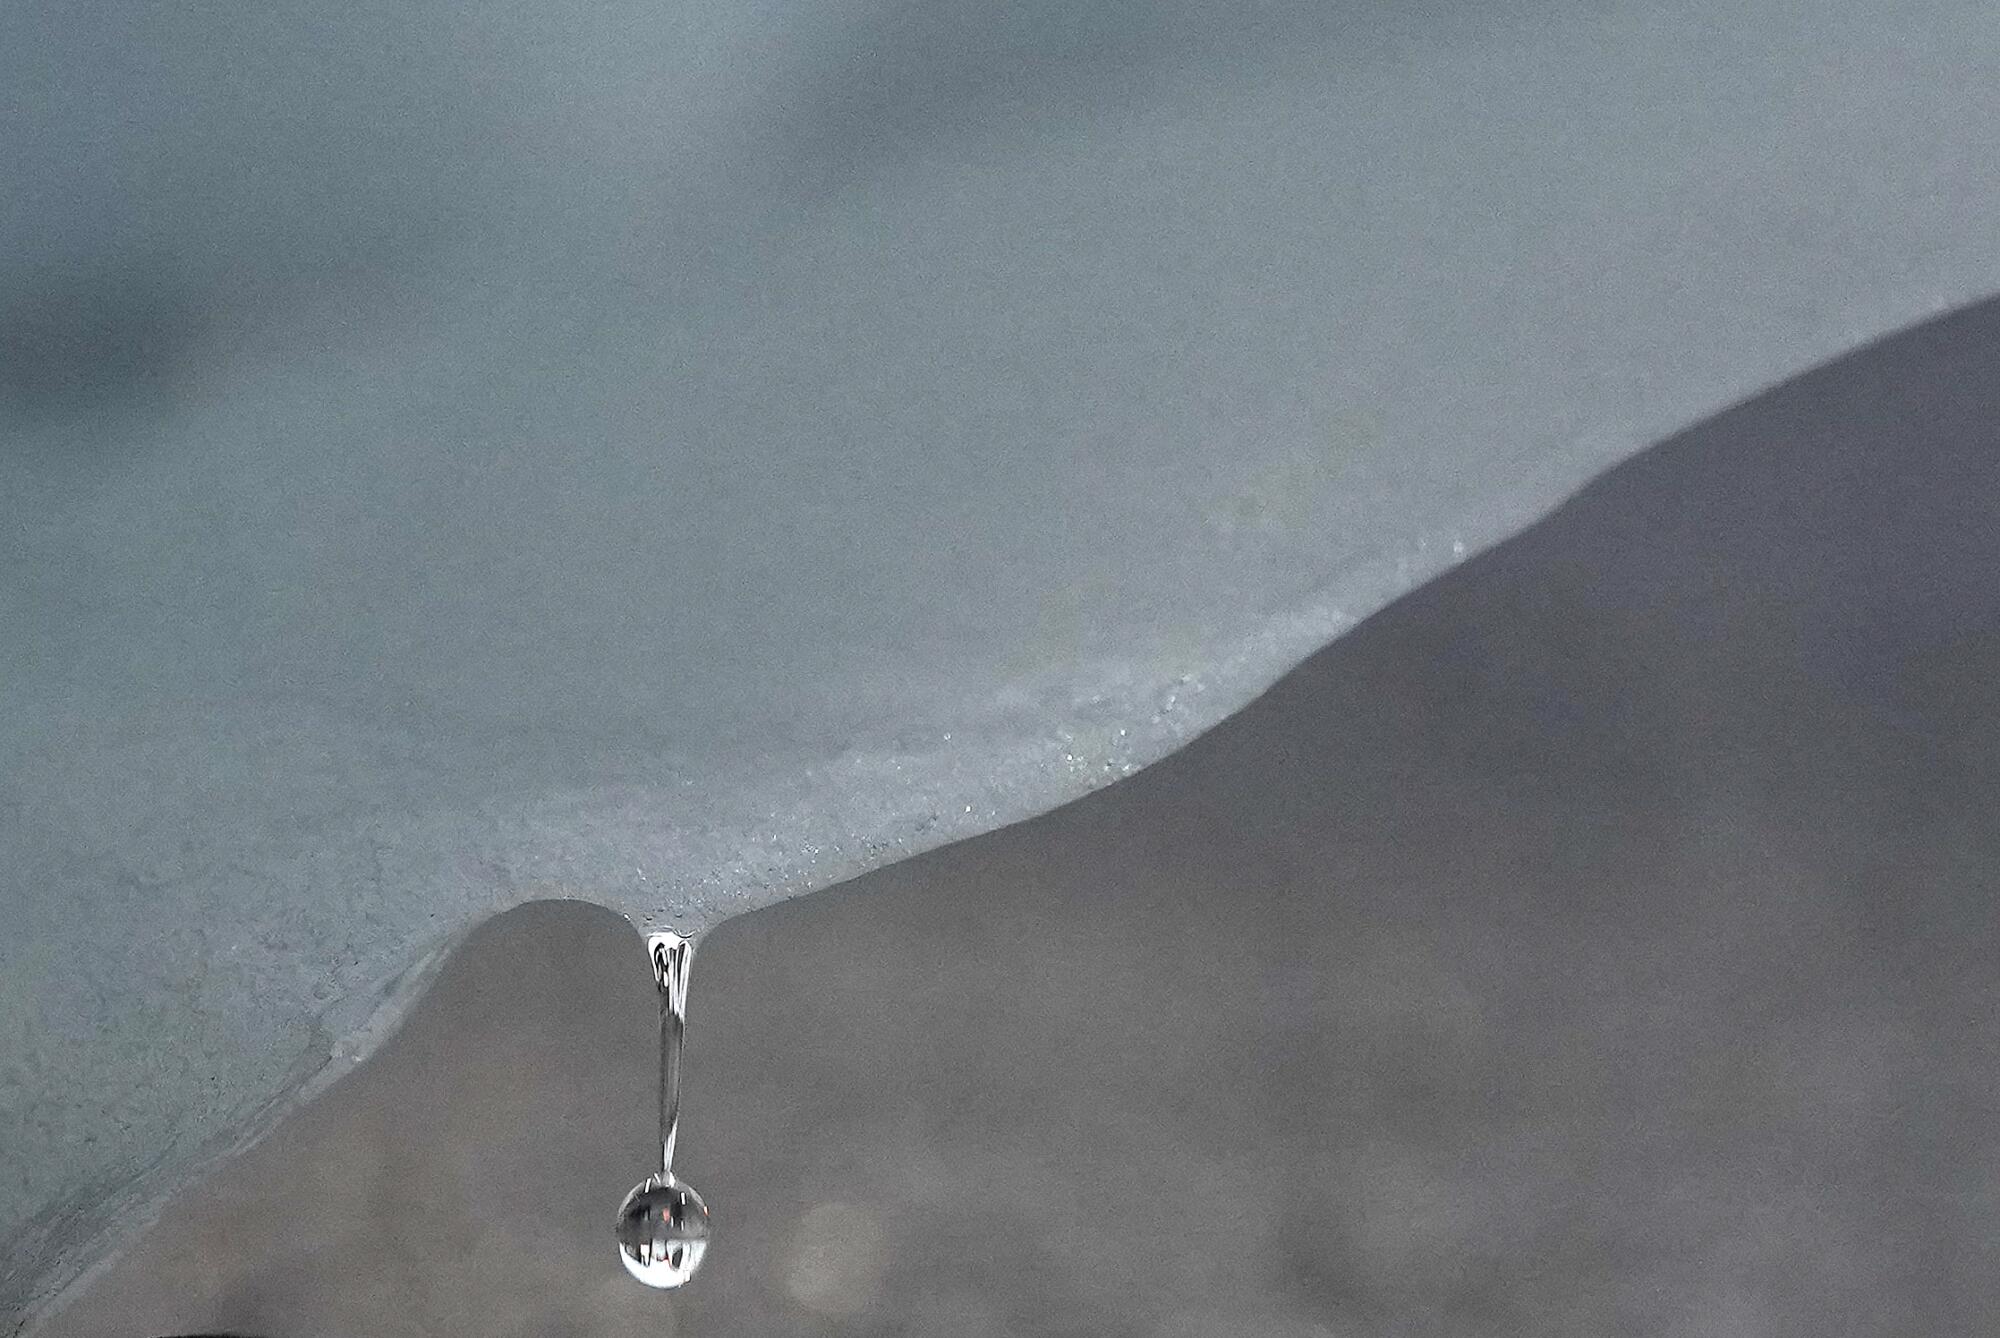 A drop of water falls from an iceberg.